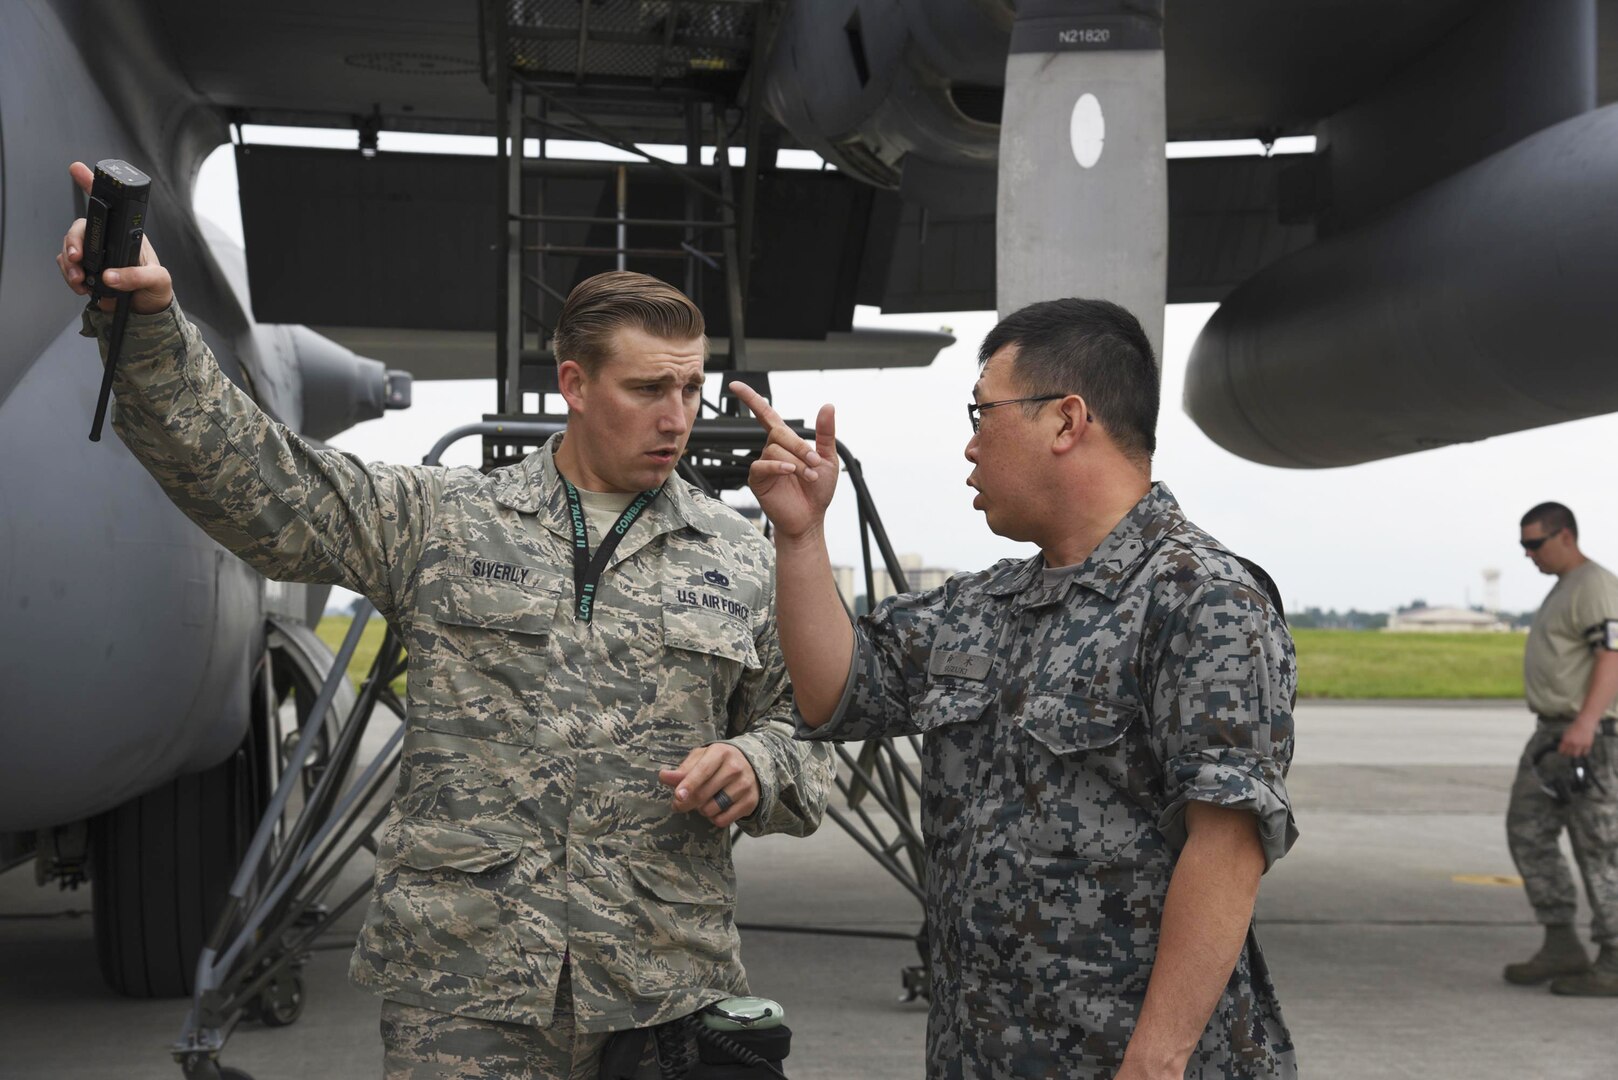 Japan Air Self-Defense Force Staff Sgt. Tatsuya Suzuki, 1st Techinical School Maintenance Section aircraft engine maintenance, asks a question about C-130 Hercules engine troubleshooting procesures to U.S. Air Force Tech. Sgt. Daylon Siverly, 374th Maintenance Squadron dock coordinator, during the Bilateral Exchange Program at Yokota Air Base, Japan, June 7, 2017. The program allowed American and Japanese Forces the opportunity to work together and learn from each other's daily operations and build a stronger relationship. 